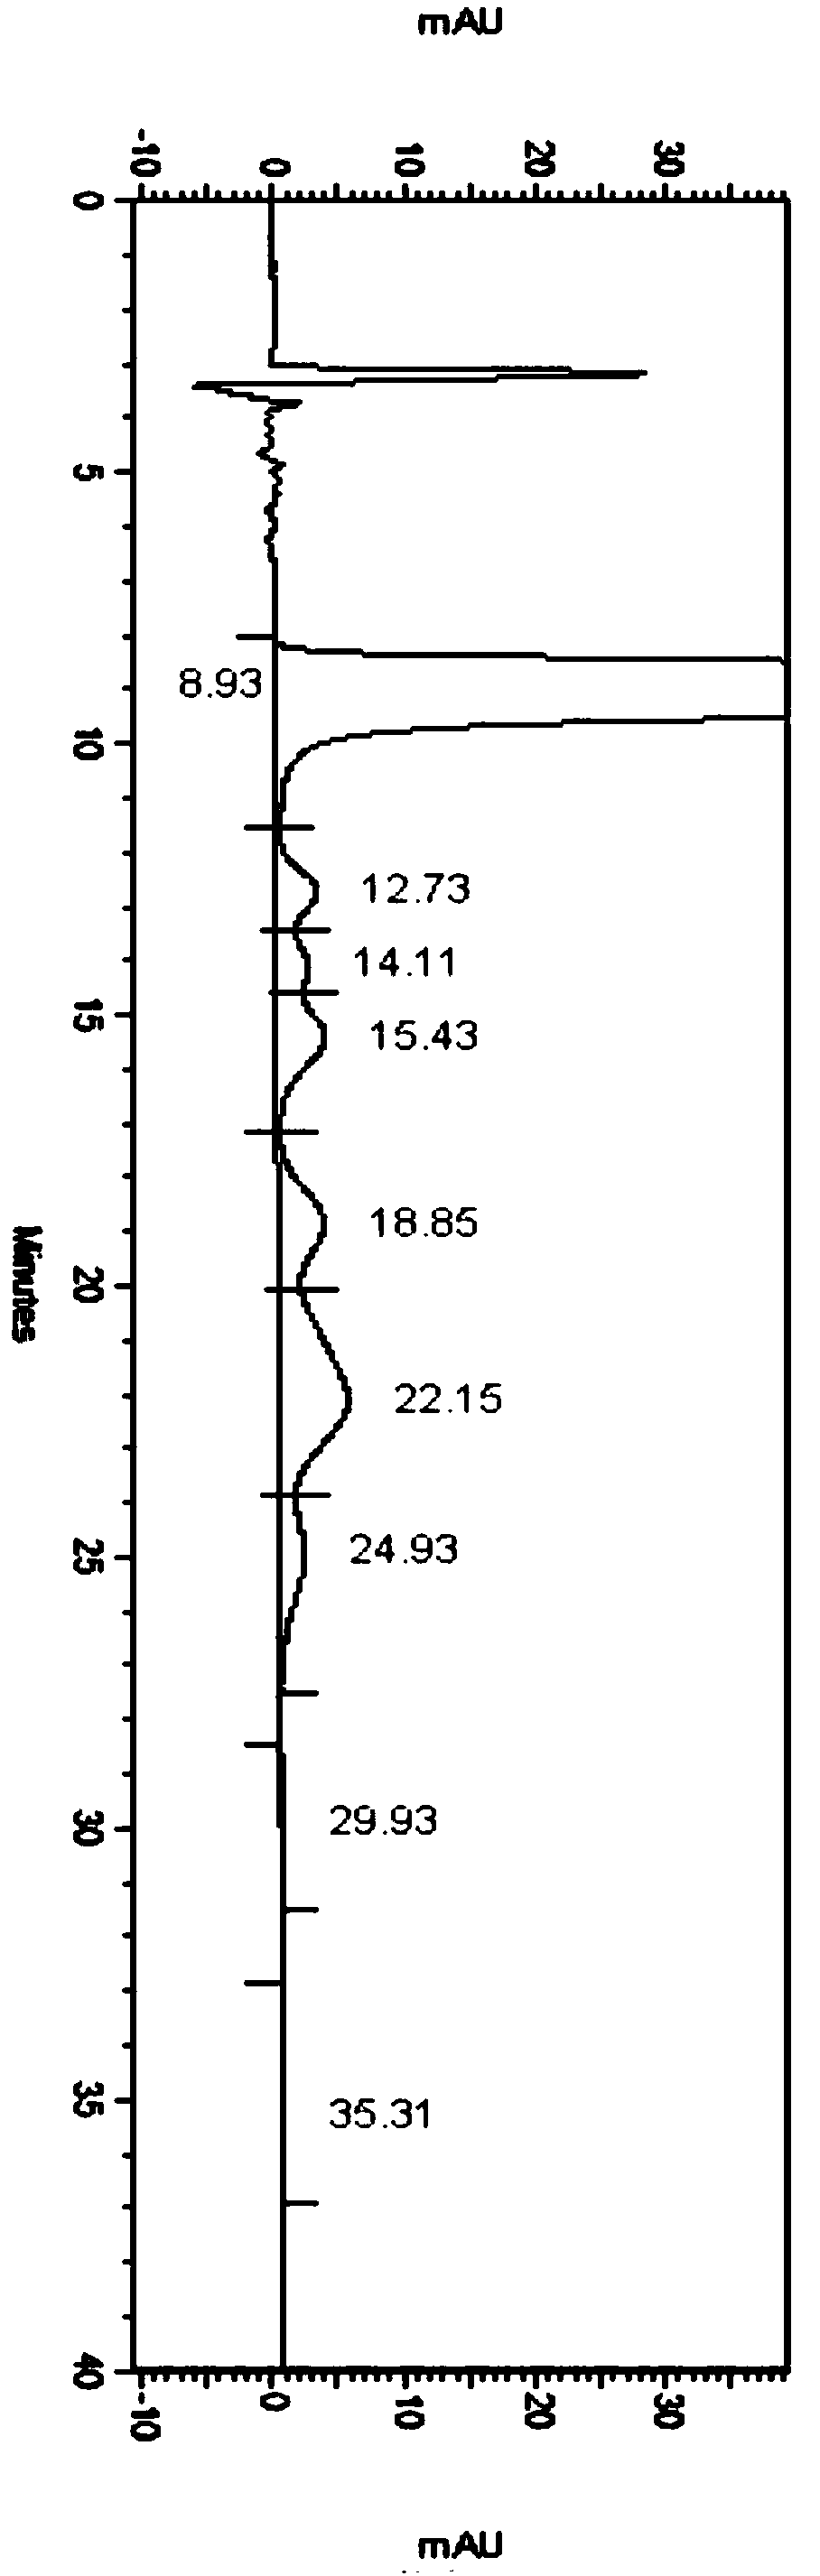 Method for separating and detecting daclatasvir hydrochloride and optical isomers thereof